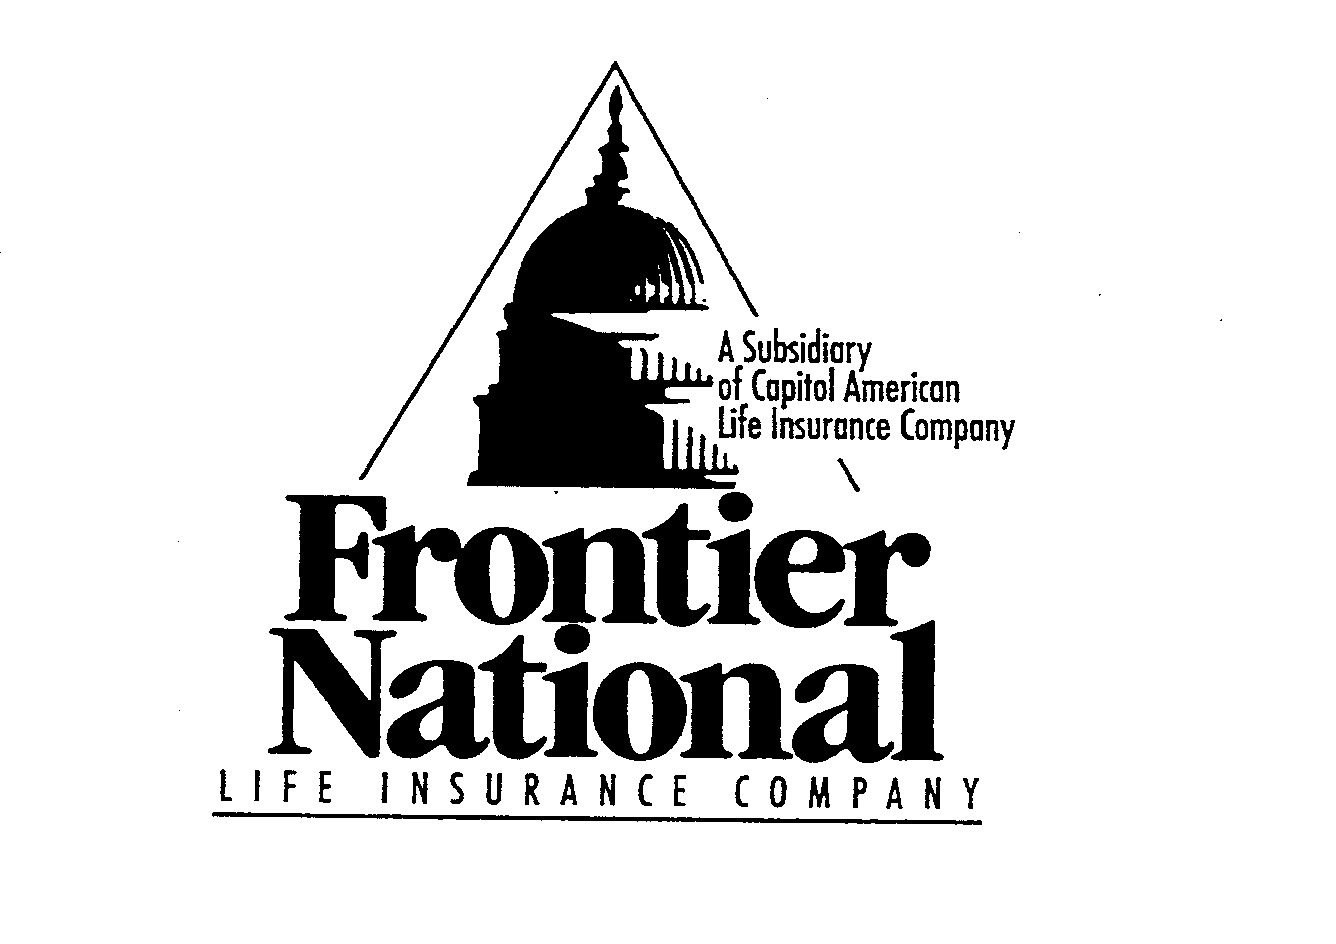  A SUBSIDIARY OF CAPITOL AMERICAN LIFE INSURANCE COMPANY FRONTIER NATIONAL LIFE INSURANCE COMPANY